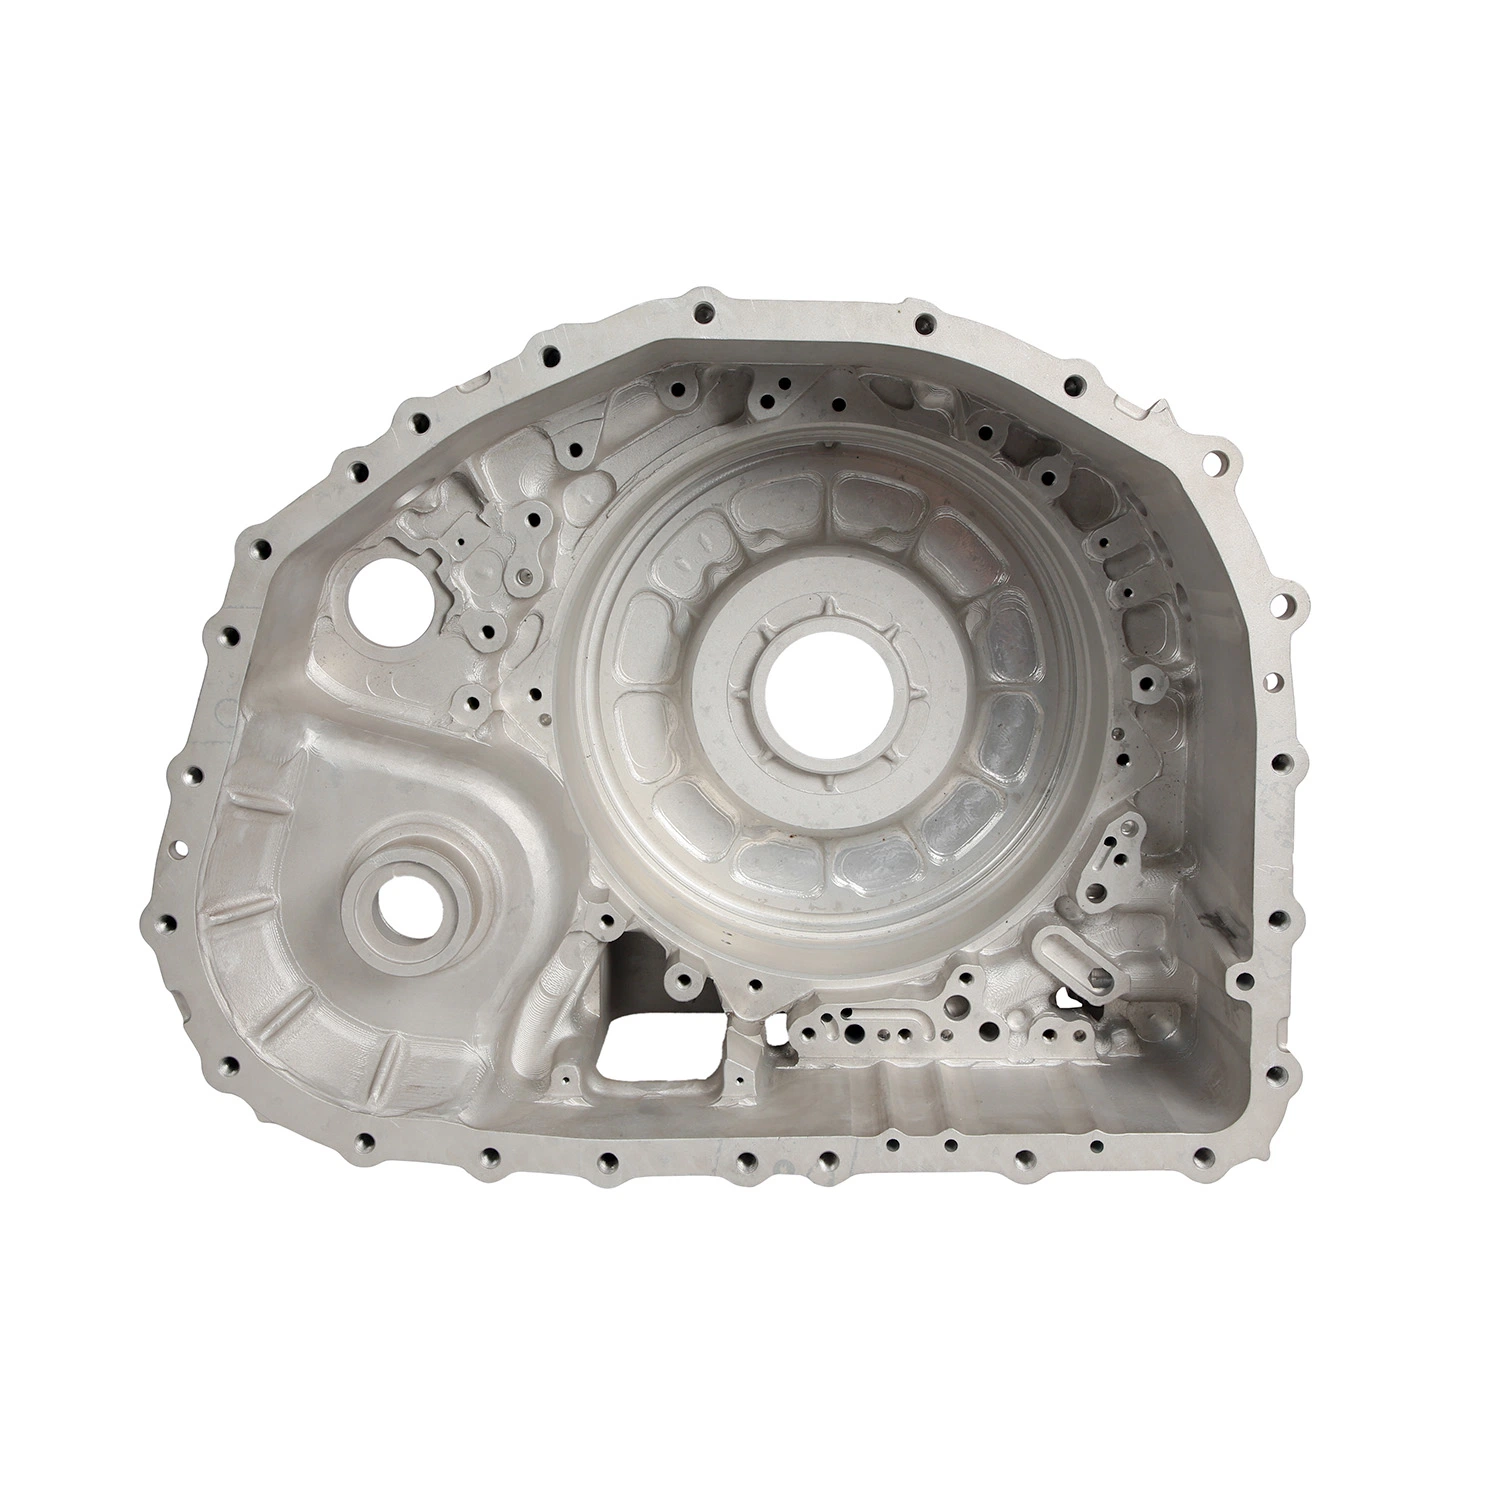 OEM Customized Sand 3D Printer & Motorcycle Spare Part Auto Engine Block Cylinder Head Housing by Rapid Prototyping with 3D Printing Sand Die Casting &Machining